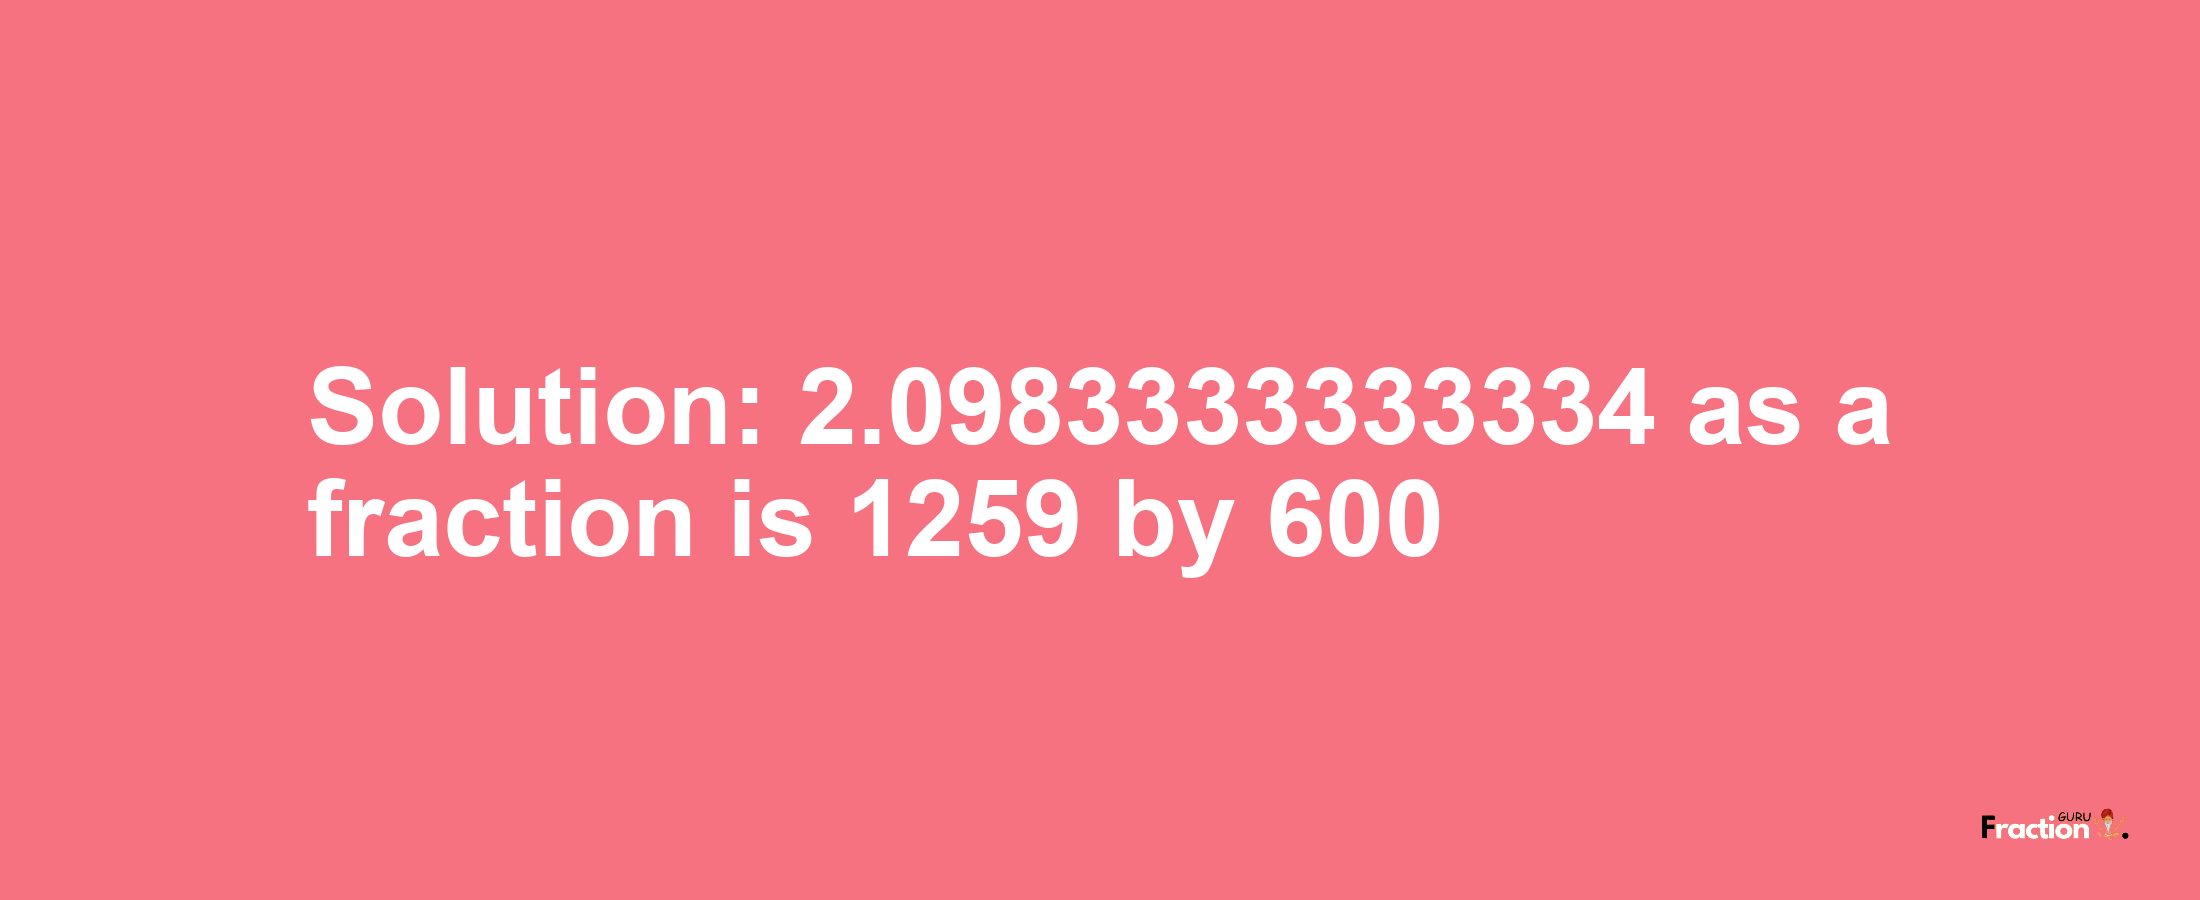 Solution:2.0983333333334 as a fraction is 1259/600